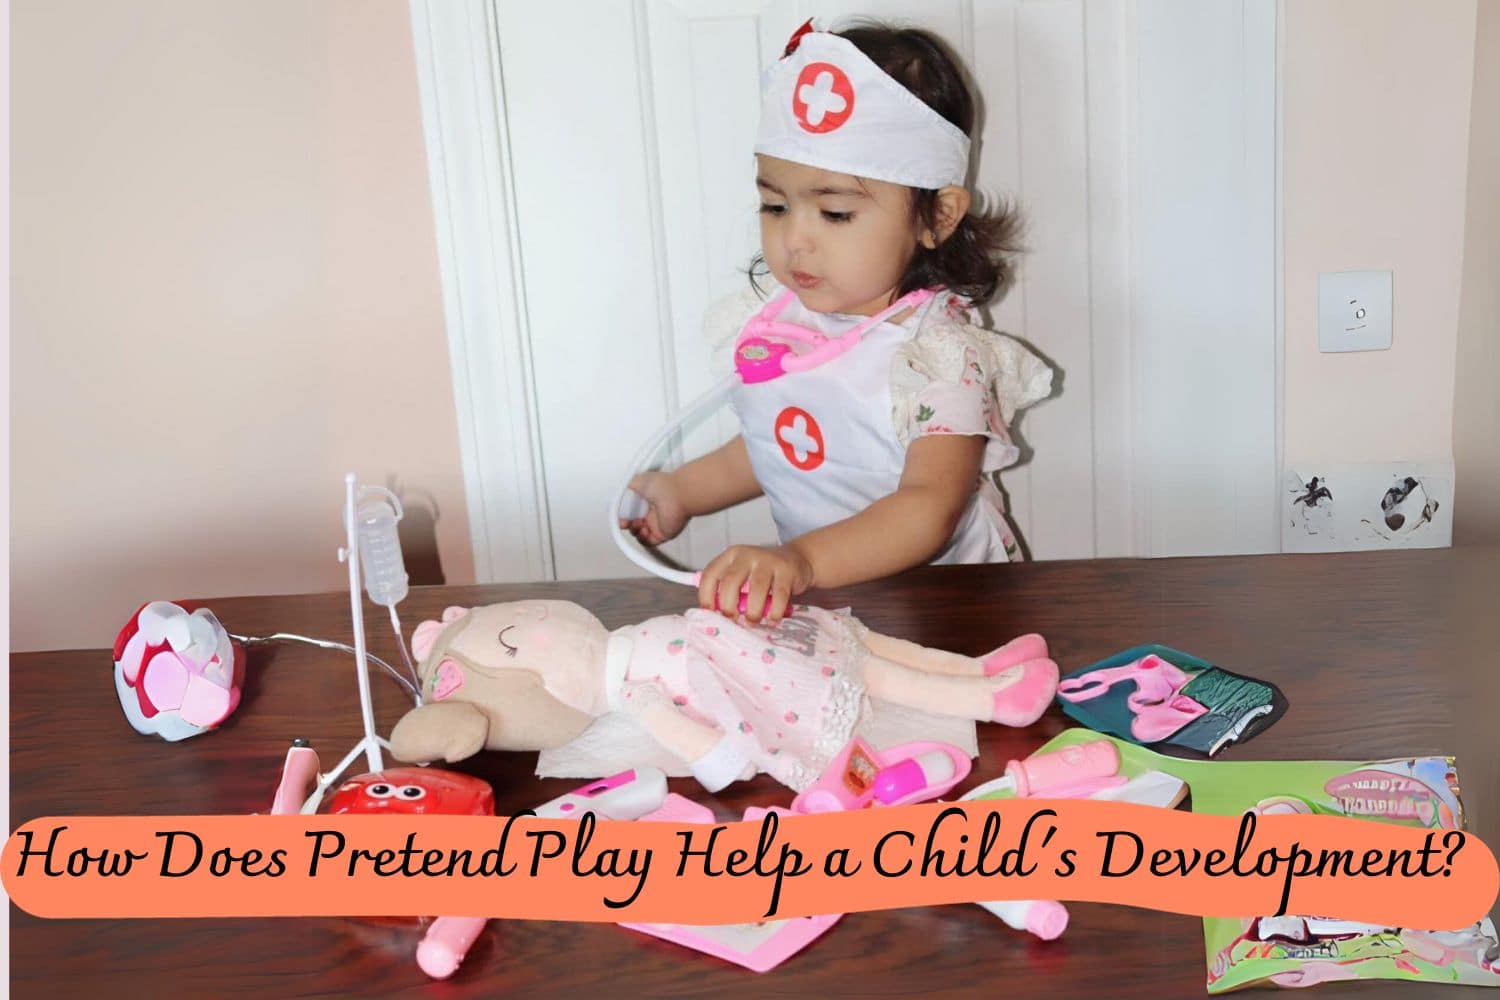 How Does Pretend Play Help a Child's Development